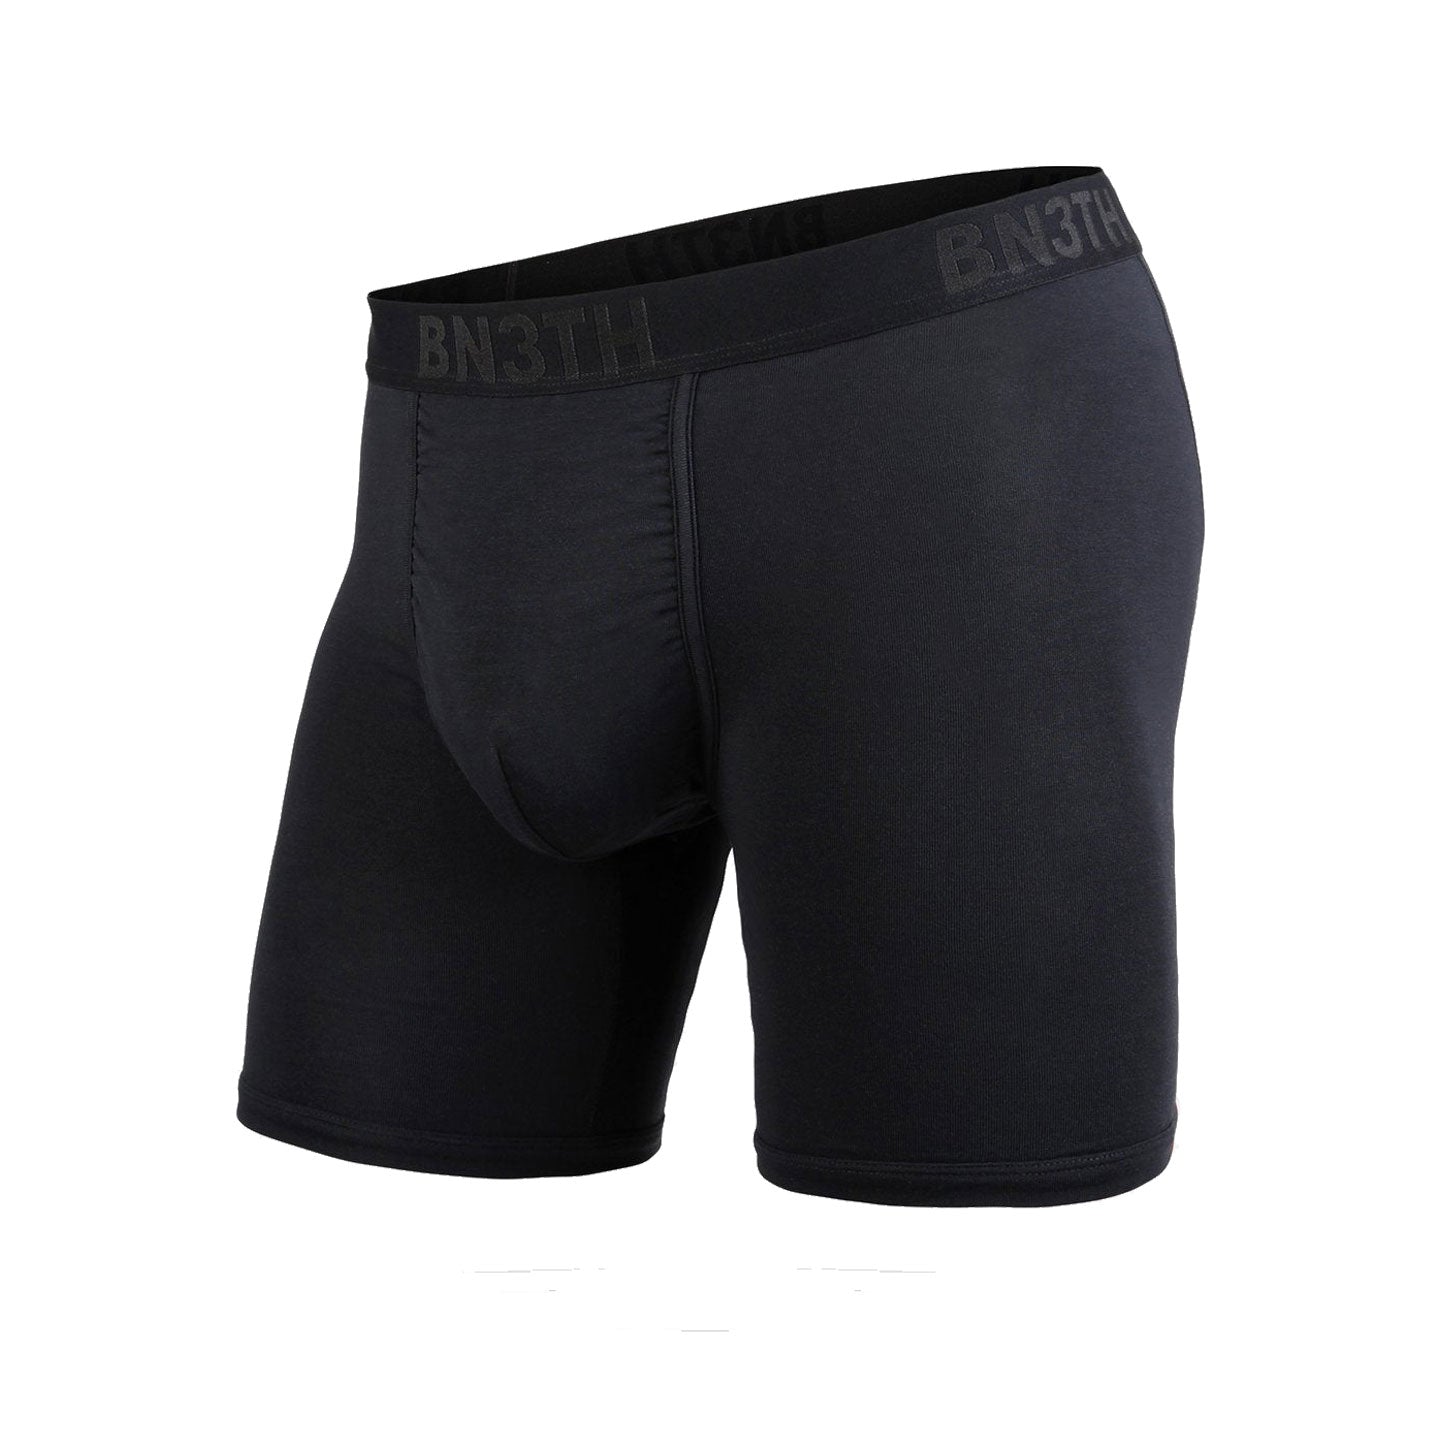 BN3TH Classic Boxer With Fly Solid Black